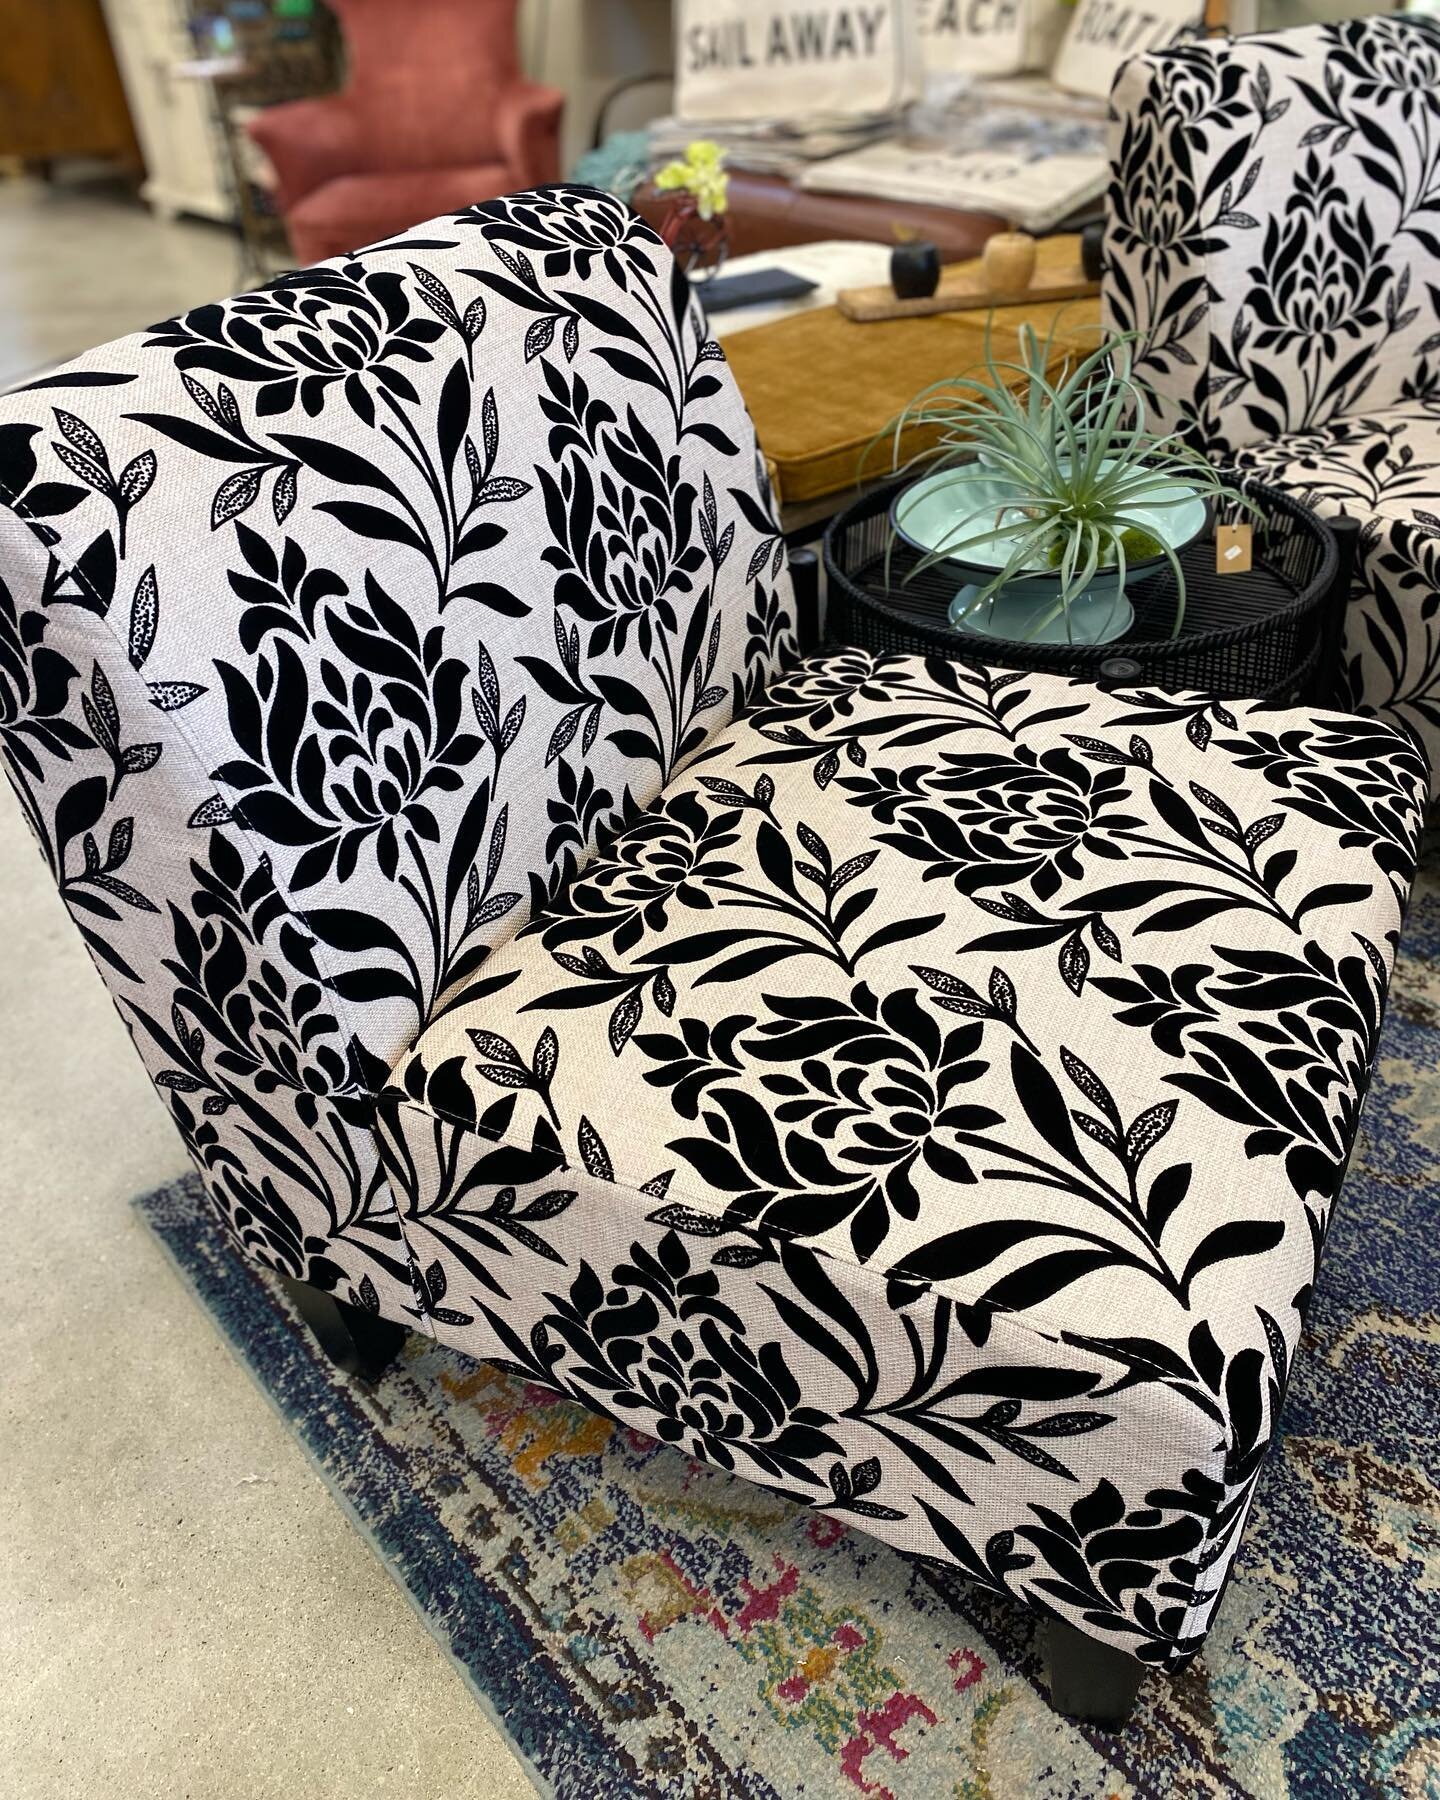 Two of the cutest slipper chairs just dropped in!  Great accent pieces ~ come on down &amp; get your Fun on! 😎
.
.
.
.
#maggiesplacesantacruz 
#visitsantacruz 
#cuteslipperchairs
#designinspo 
#beachchic
#lifeisbetteratthebeach🌴 
#designservices 
#